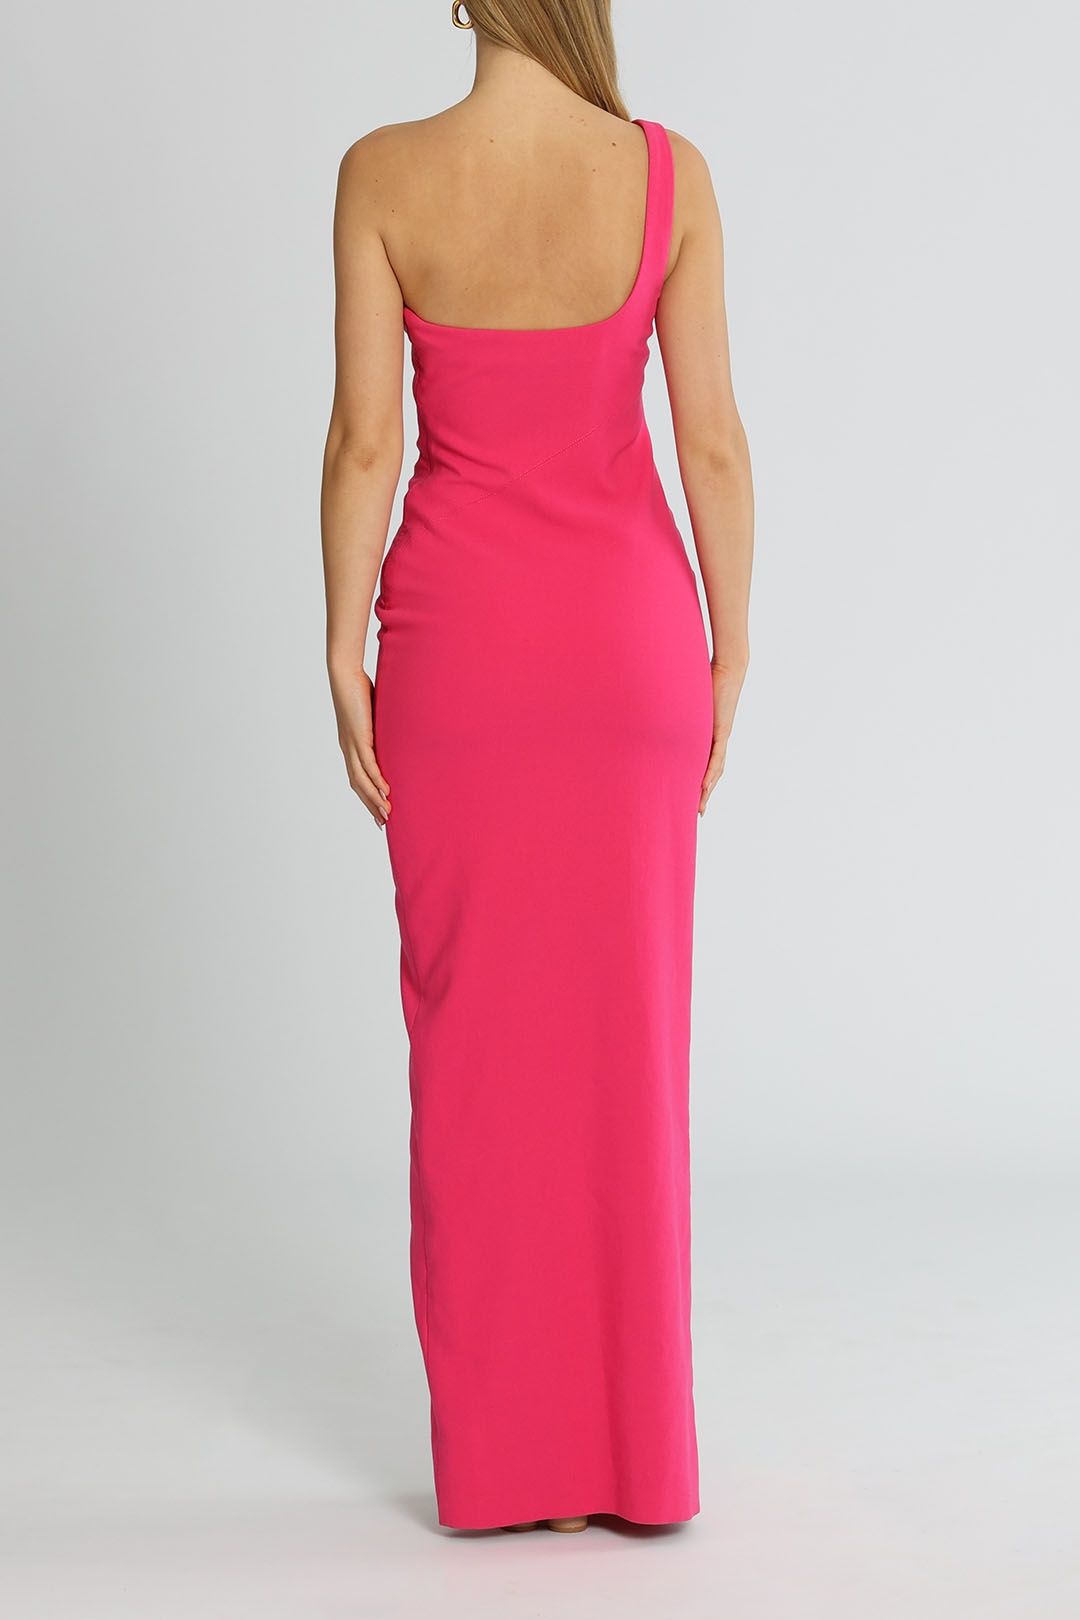 Likely NYC Camden Gown Fuschia One Shoulder